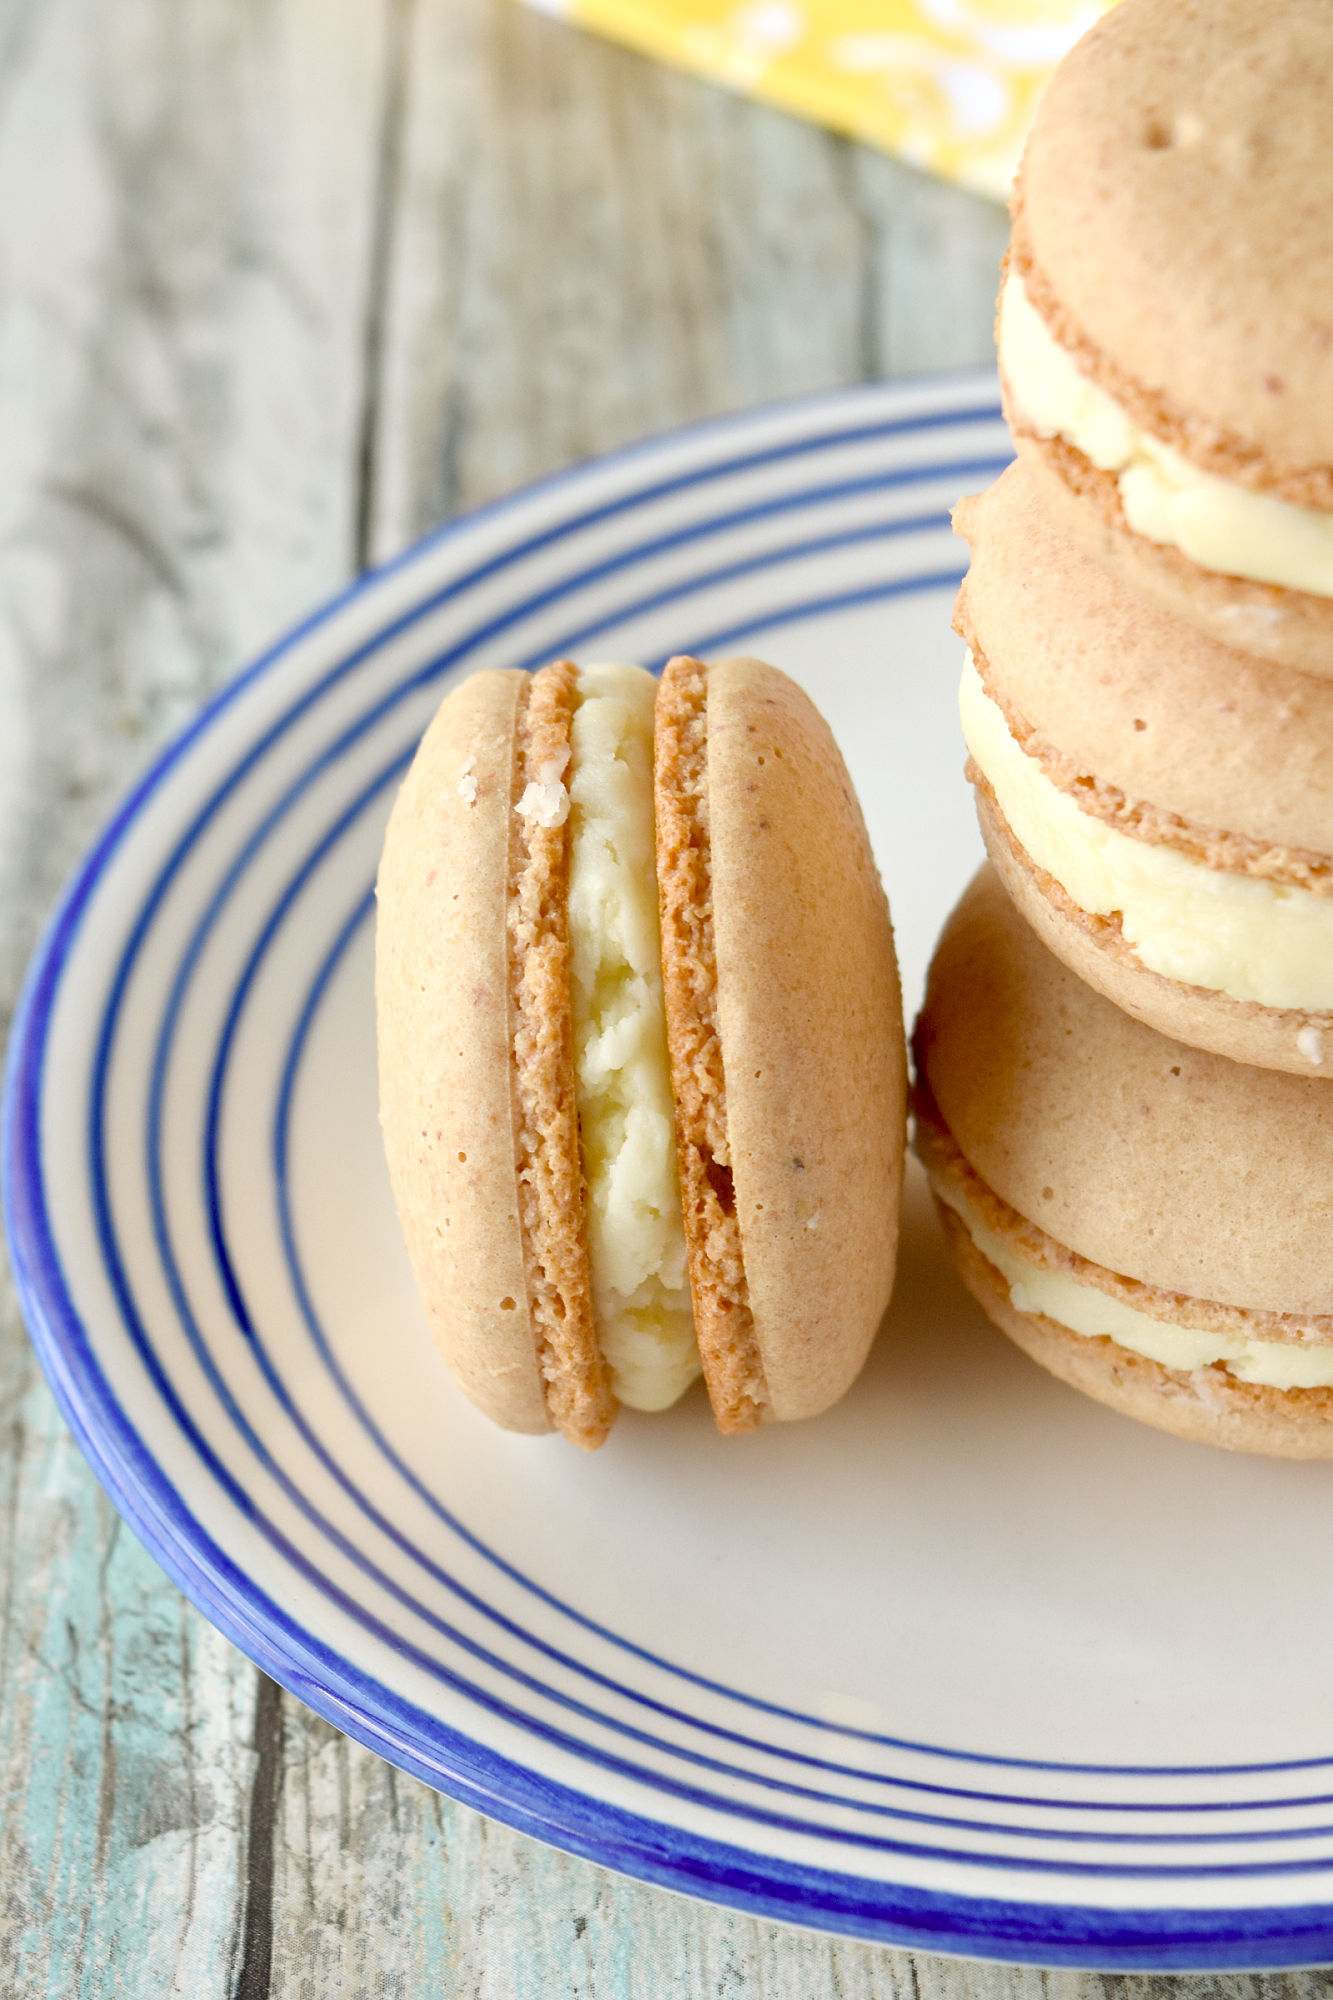 Strawberry Lemonade Macaron have the sweetness of strawberries in the shells and the tartness of lemons in the buttercream. They taste like the delicious summertime drink in a macaron. #BrunchWeek